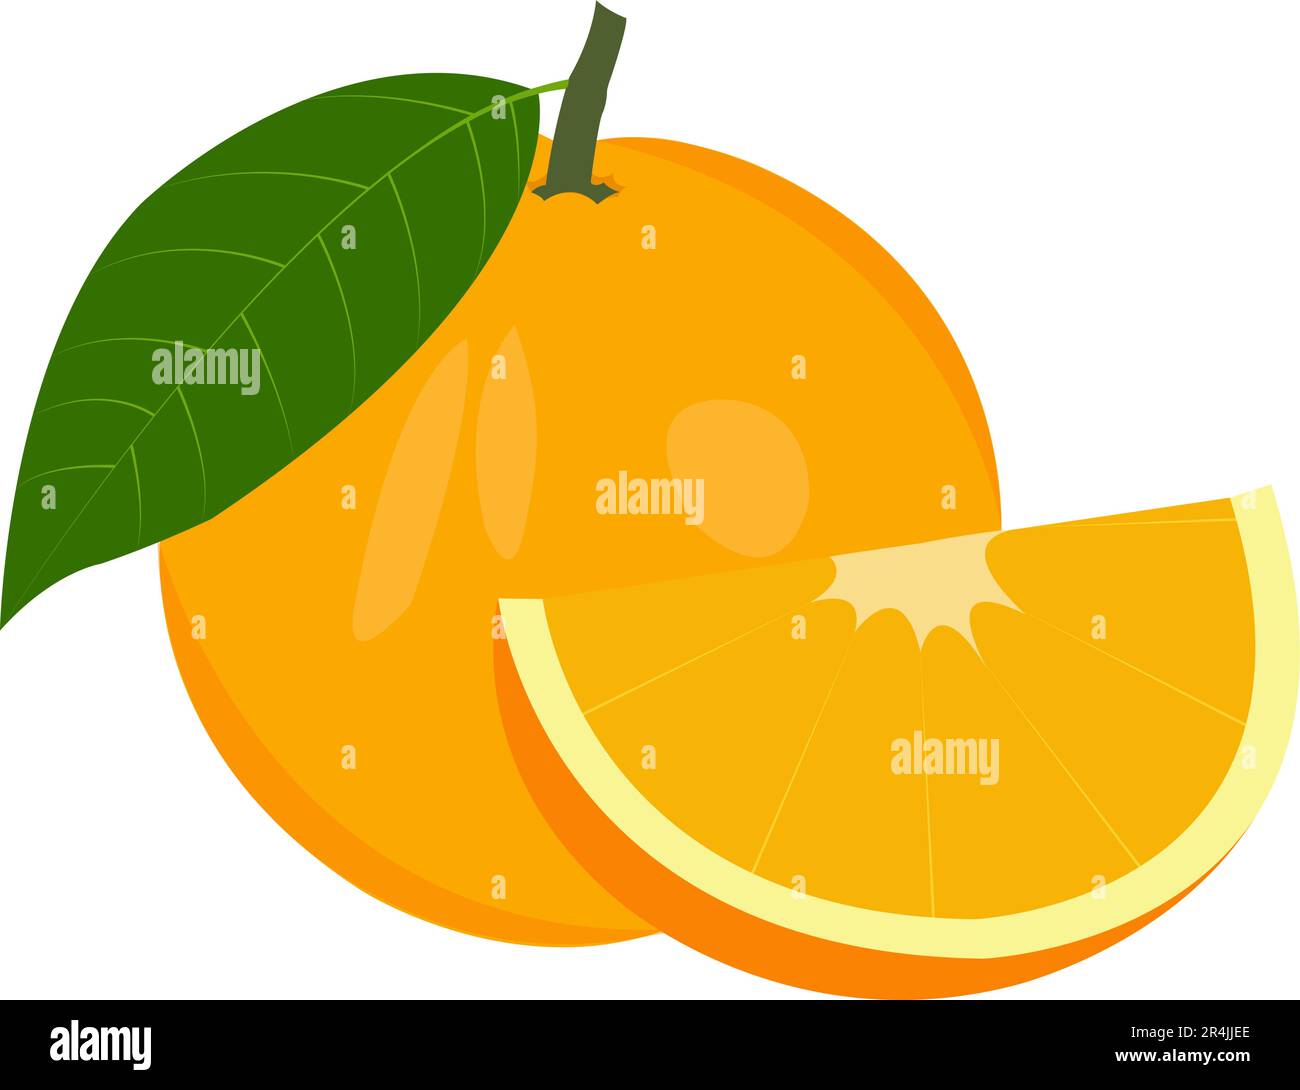 Healthy and nutritional fruits Orange Vector Illustration Stock Vector